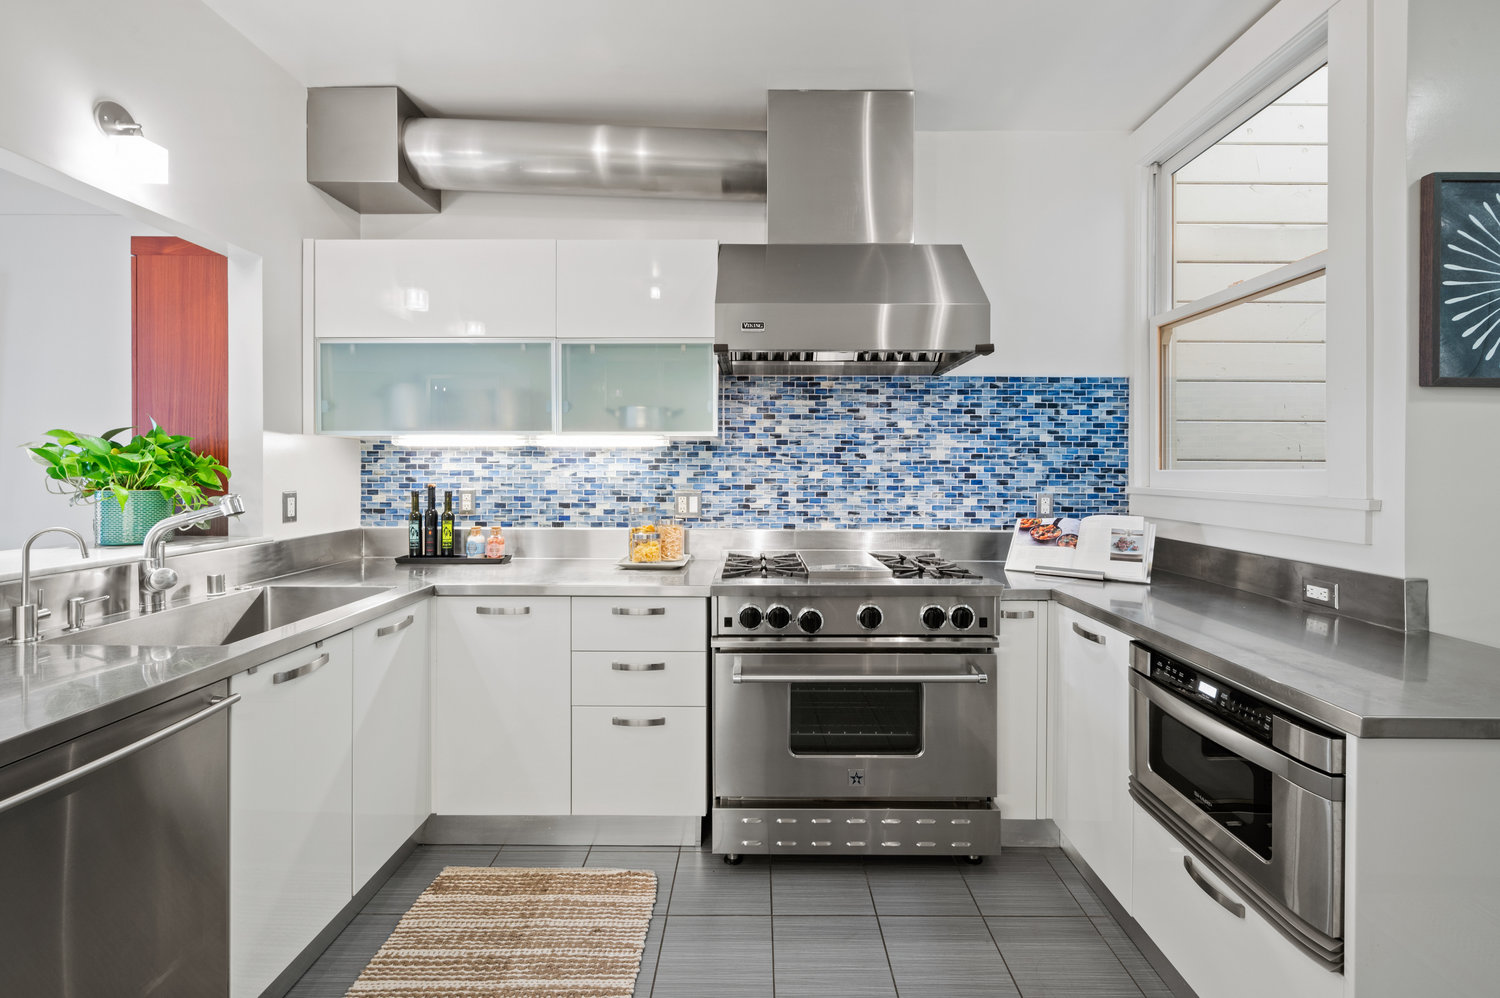 Property Photo: Kitchen the has all stainless steel appliances and a beautiful light blue tile backsplash. .